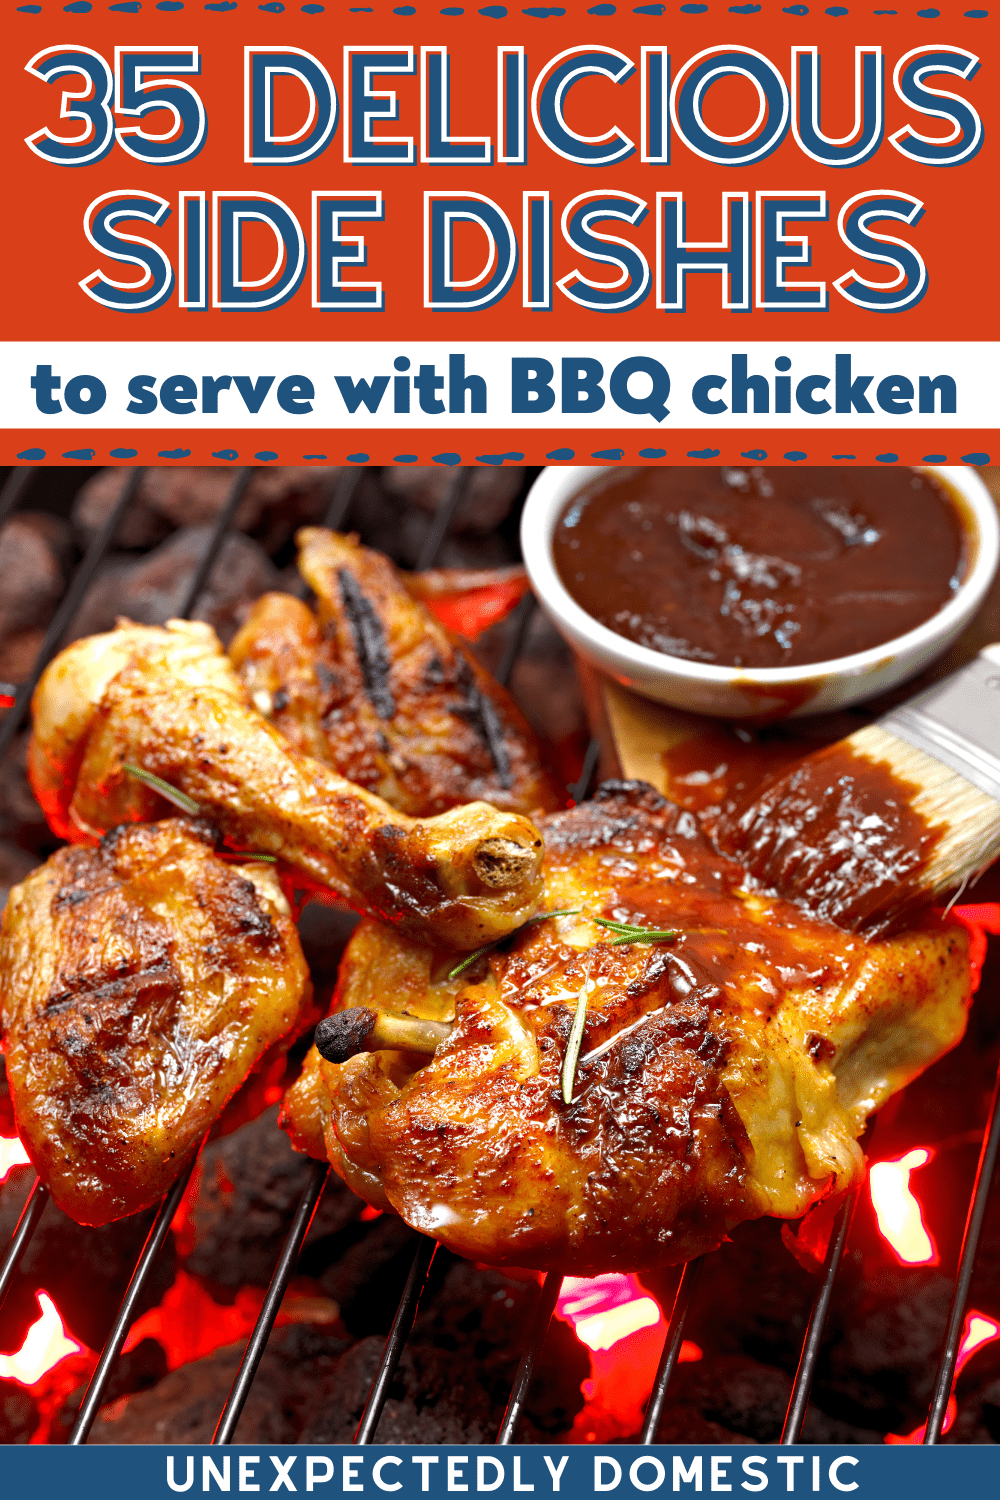 The best BBQ chicken side dishes! These summer sides are perfect for grilled chicken breasts, barbecue chicken and pulled chicken sandwiches or sliders.